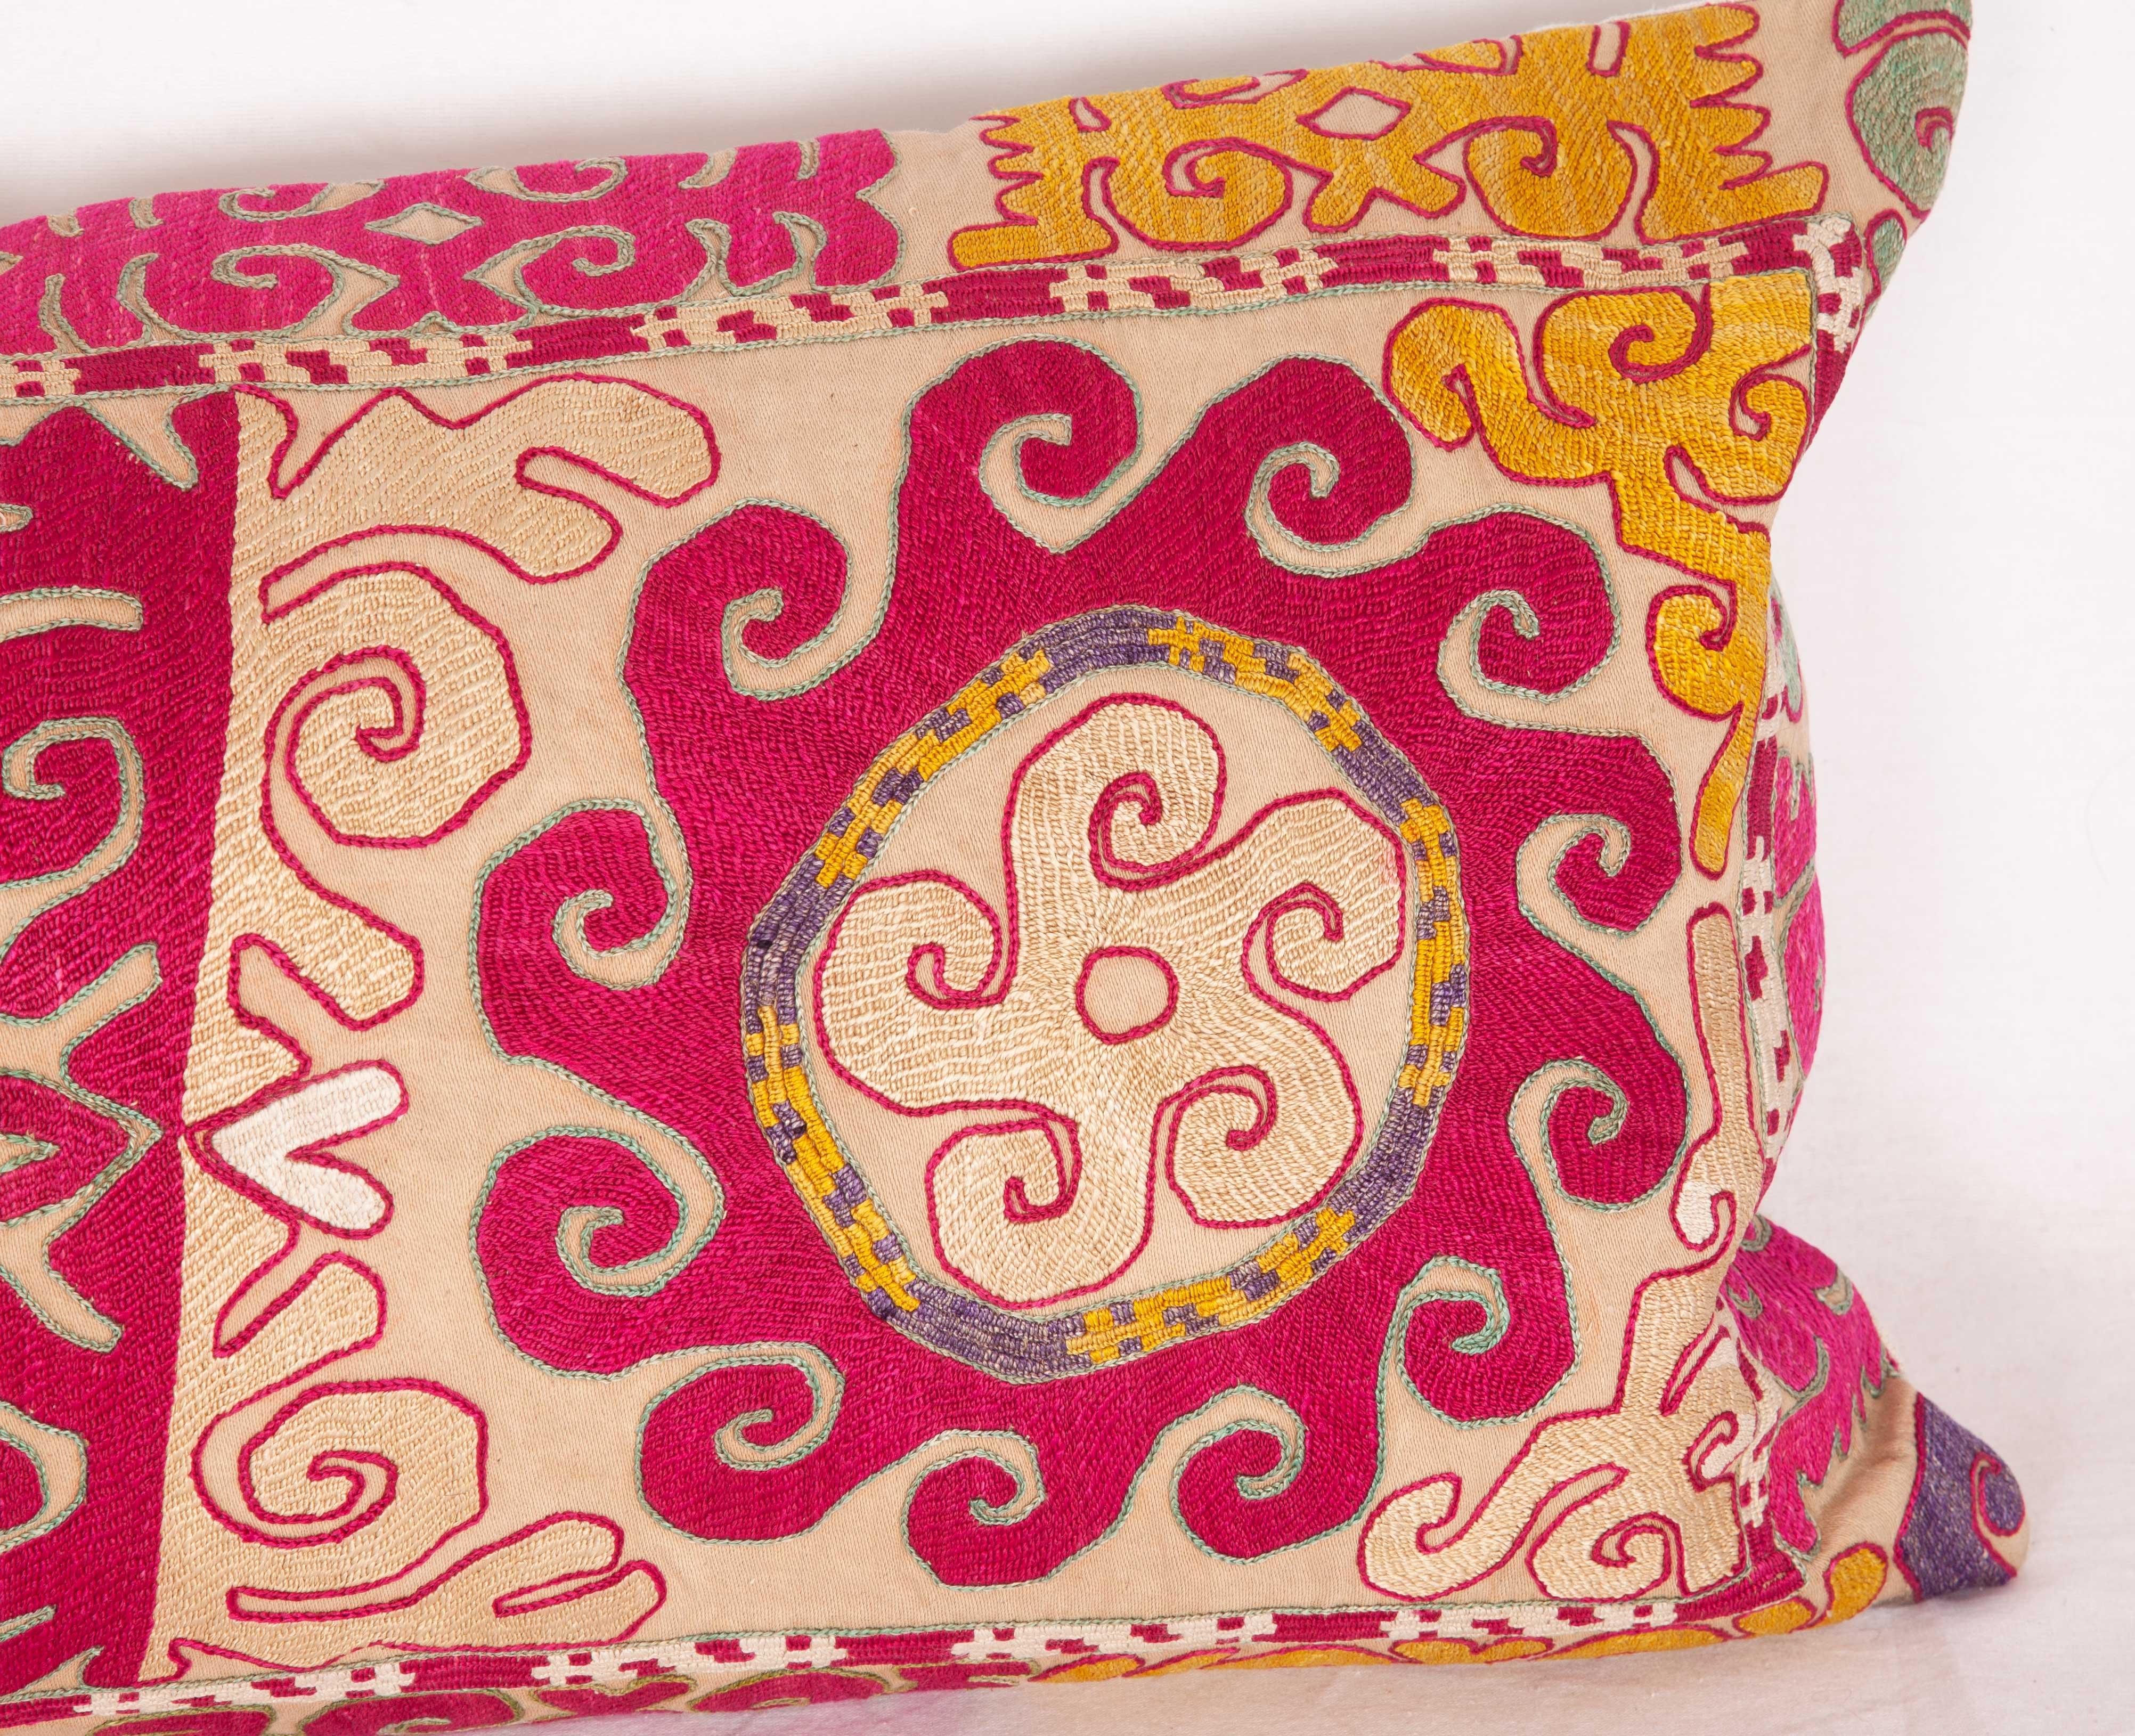 20th Century Lumbar Pillow Case Fashioned from an Uzbek Embroidered Mafrash Panel